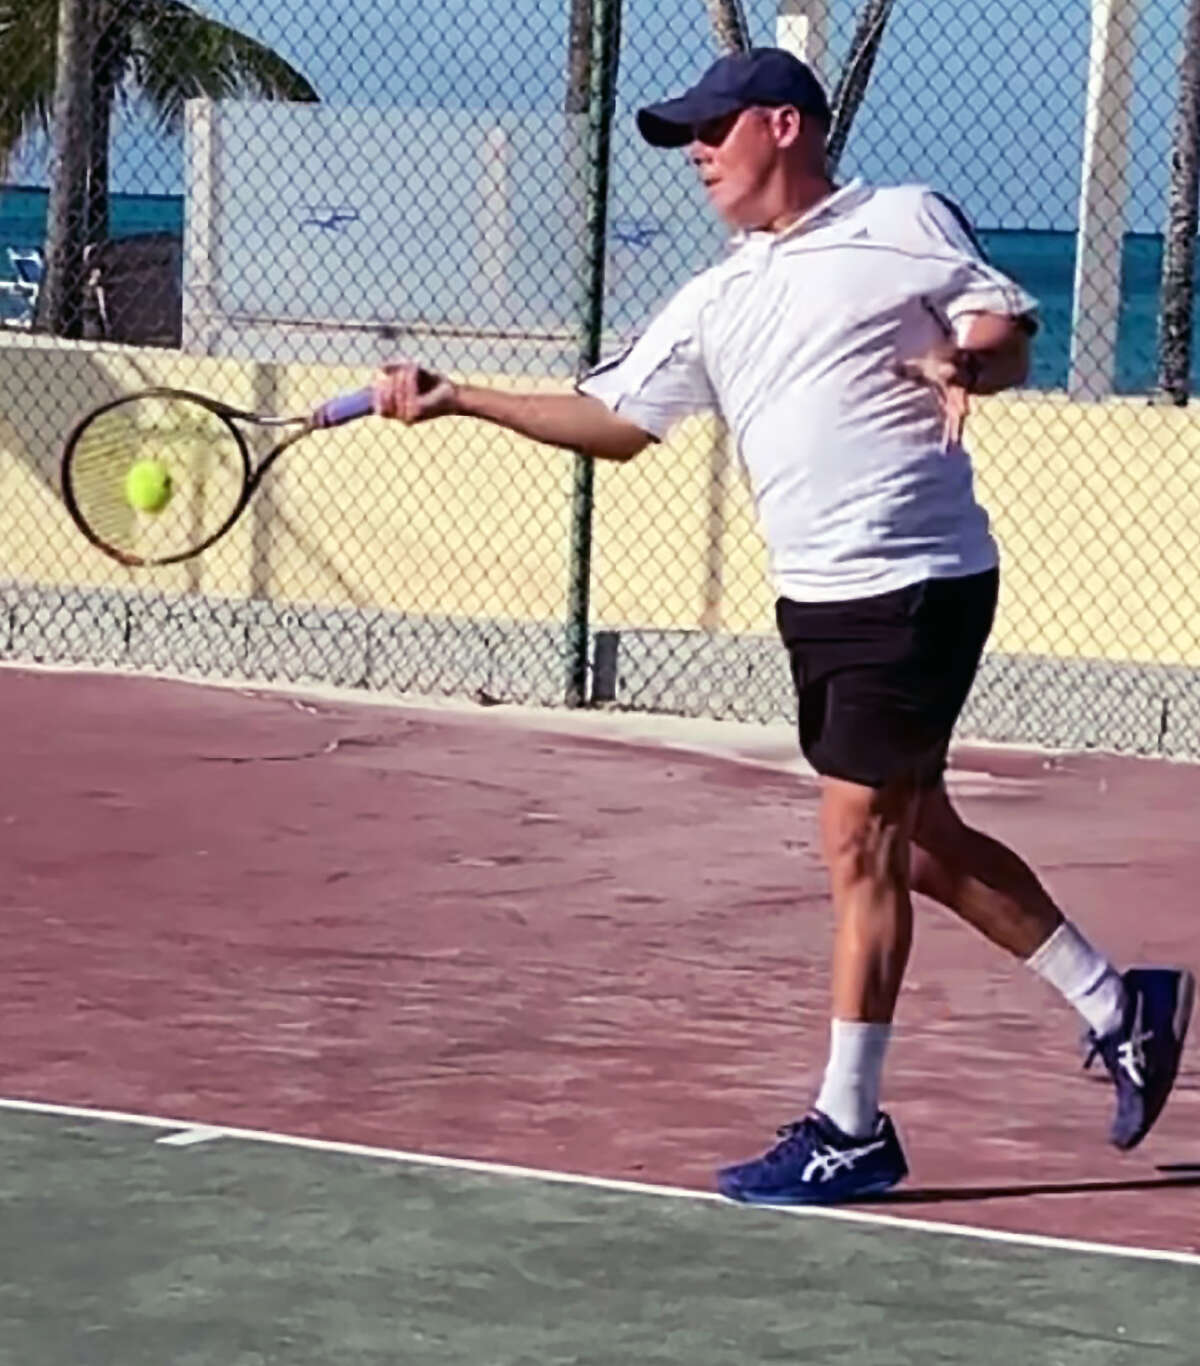 Alton native Steve Moehn of the United States International Club Team makes a return during action in the IC Bahamas Doubles Tournament last week at the Nassau Bahamas Lawn and Tennis Club.